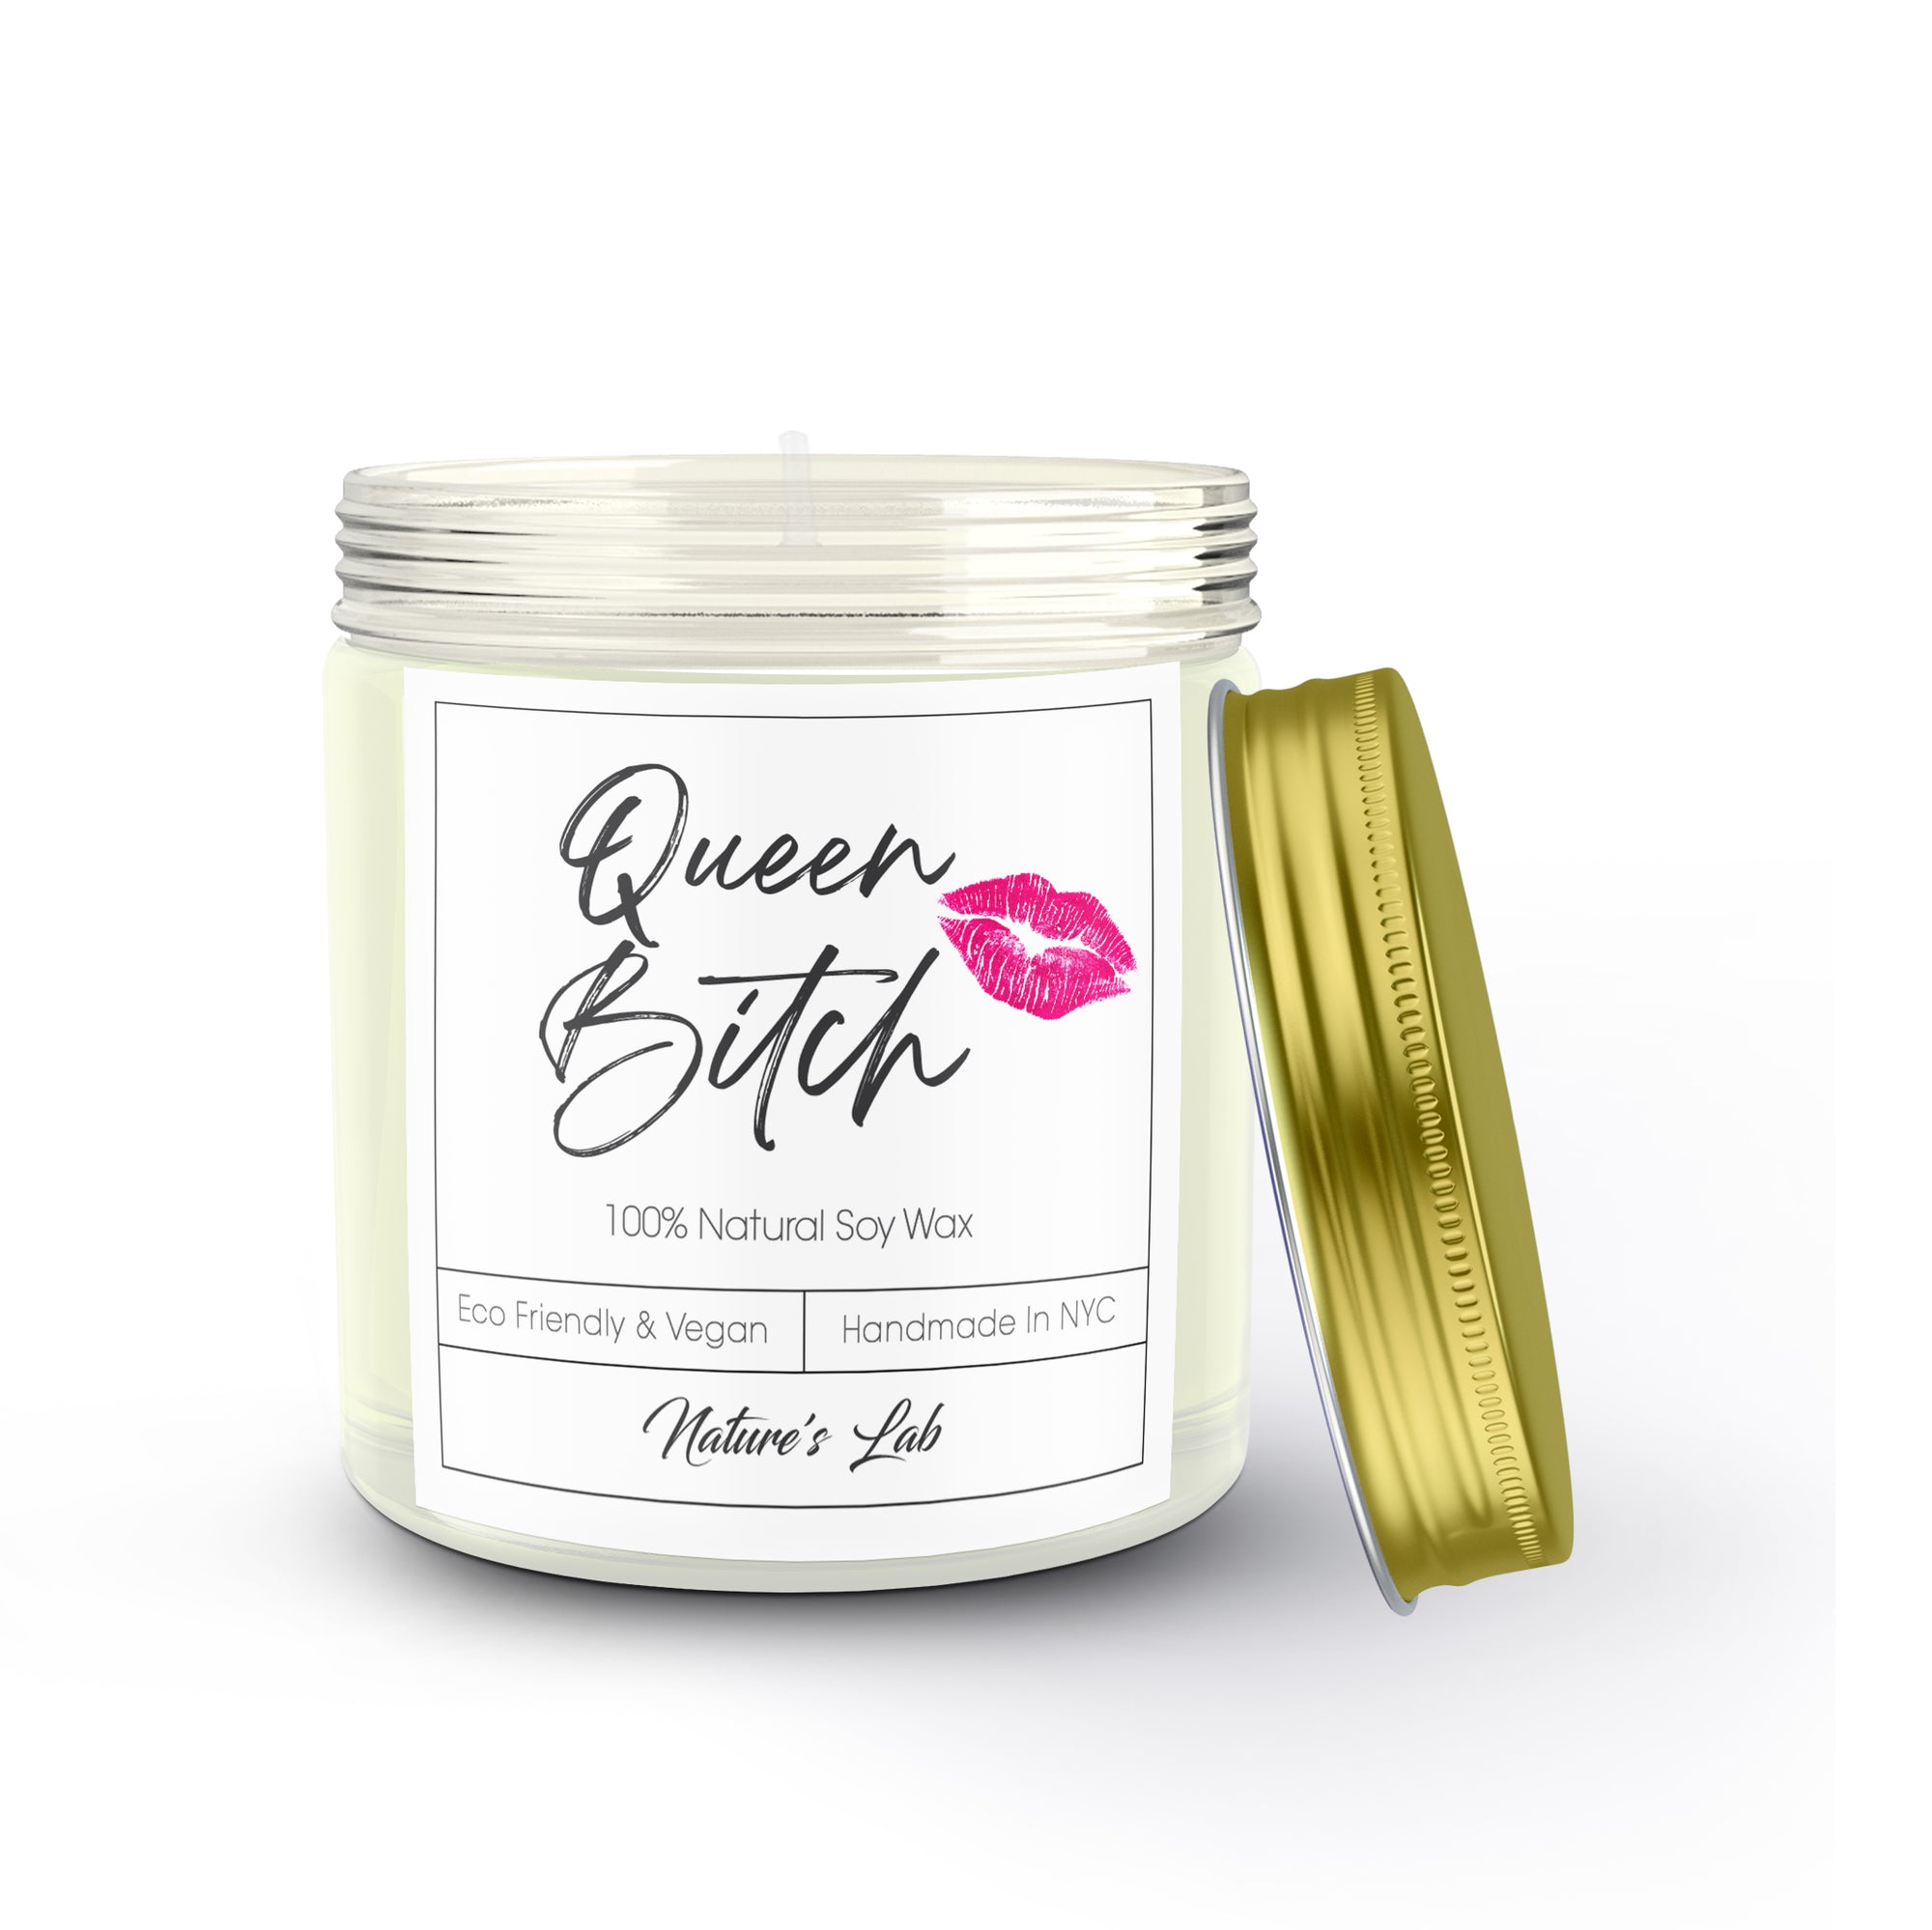 Queen Bitch Soy Wax Candle